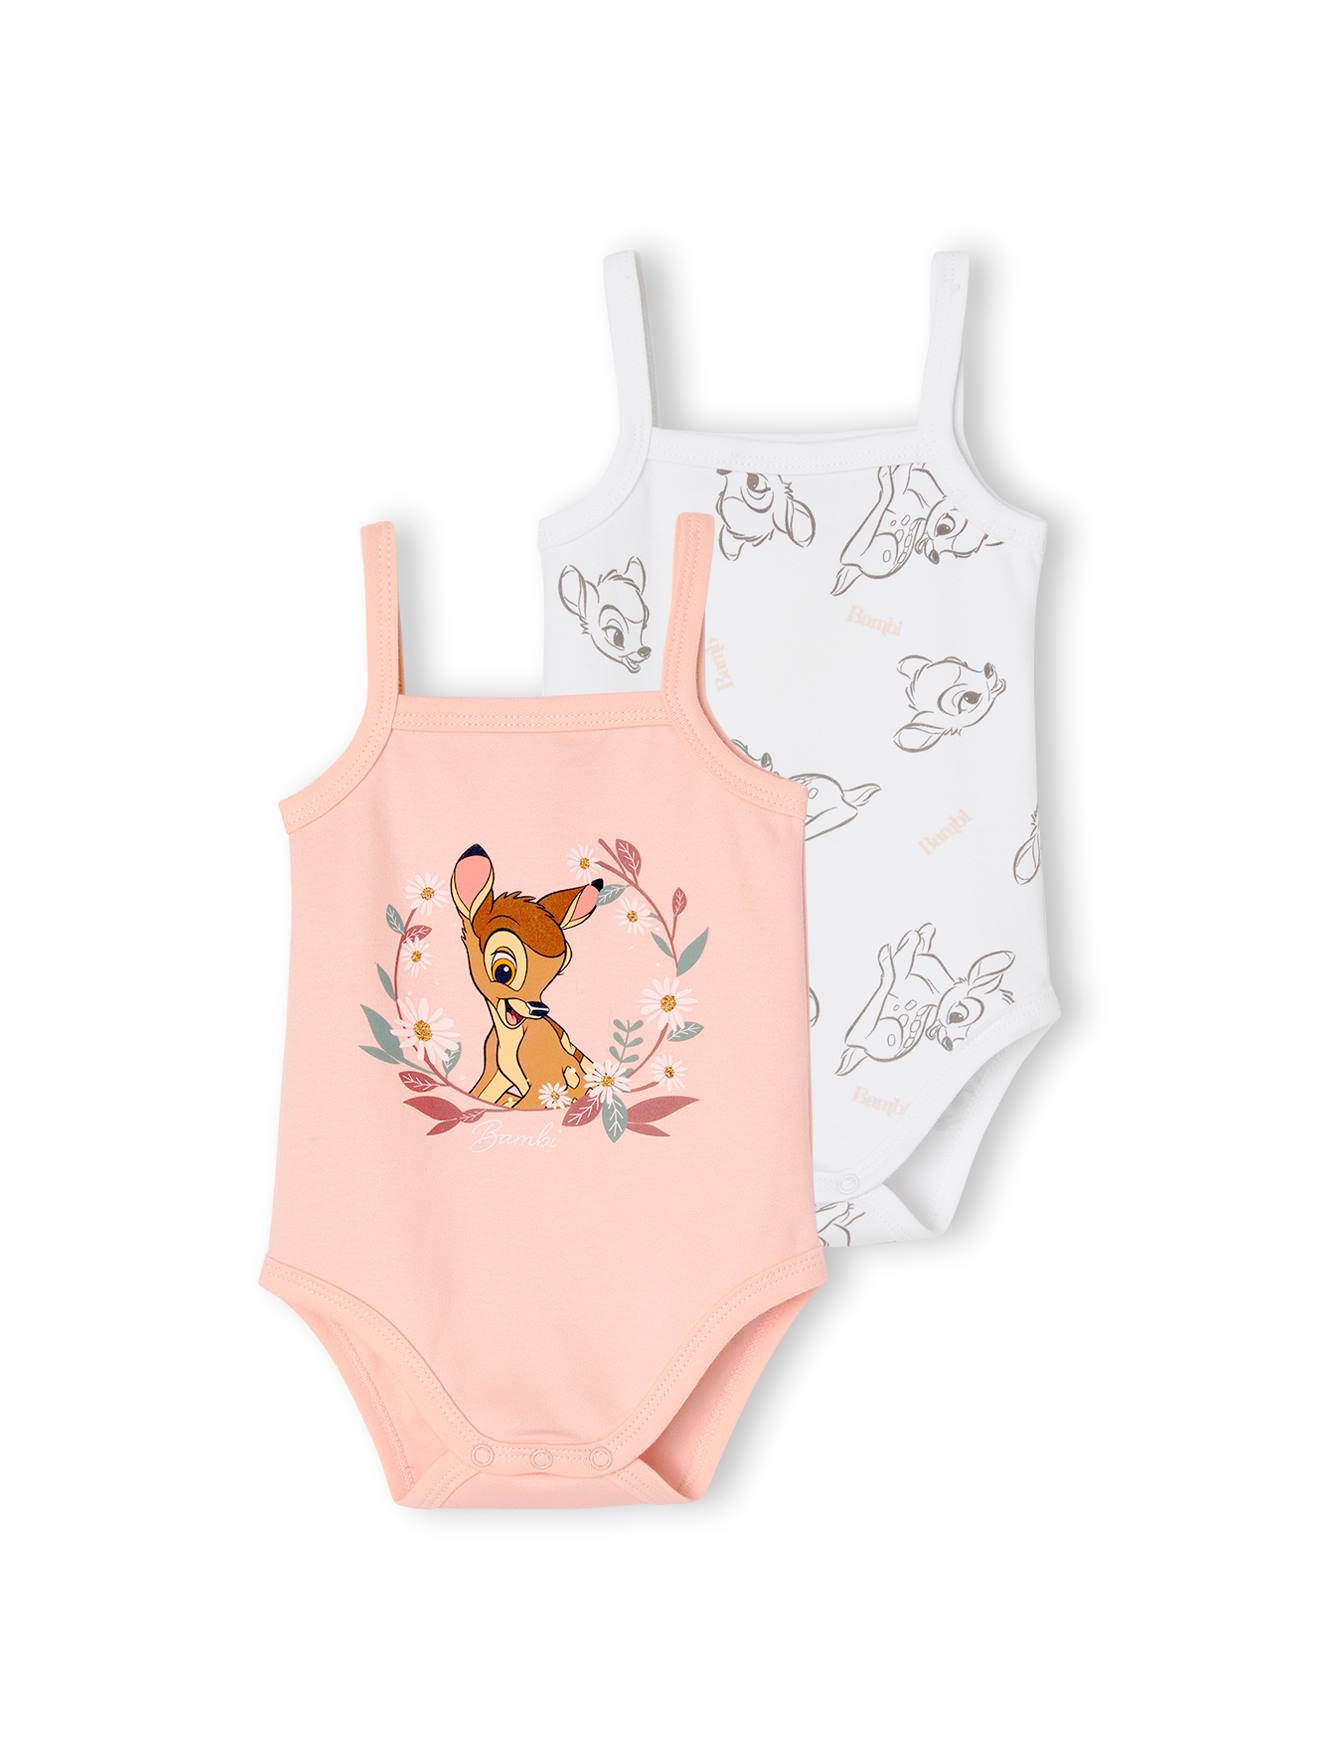 Pack of 2 Bambi by Disney® Bodysuits for Babies - old rose, Baby